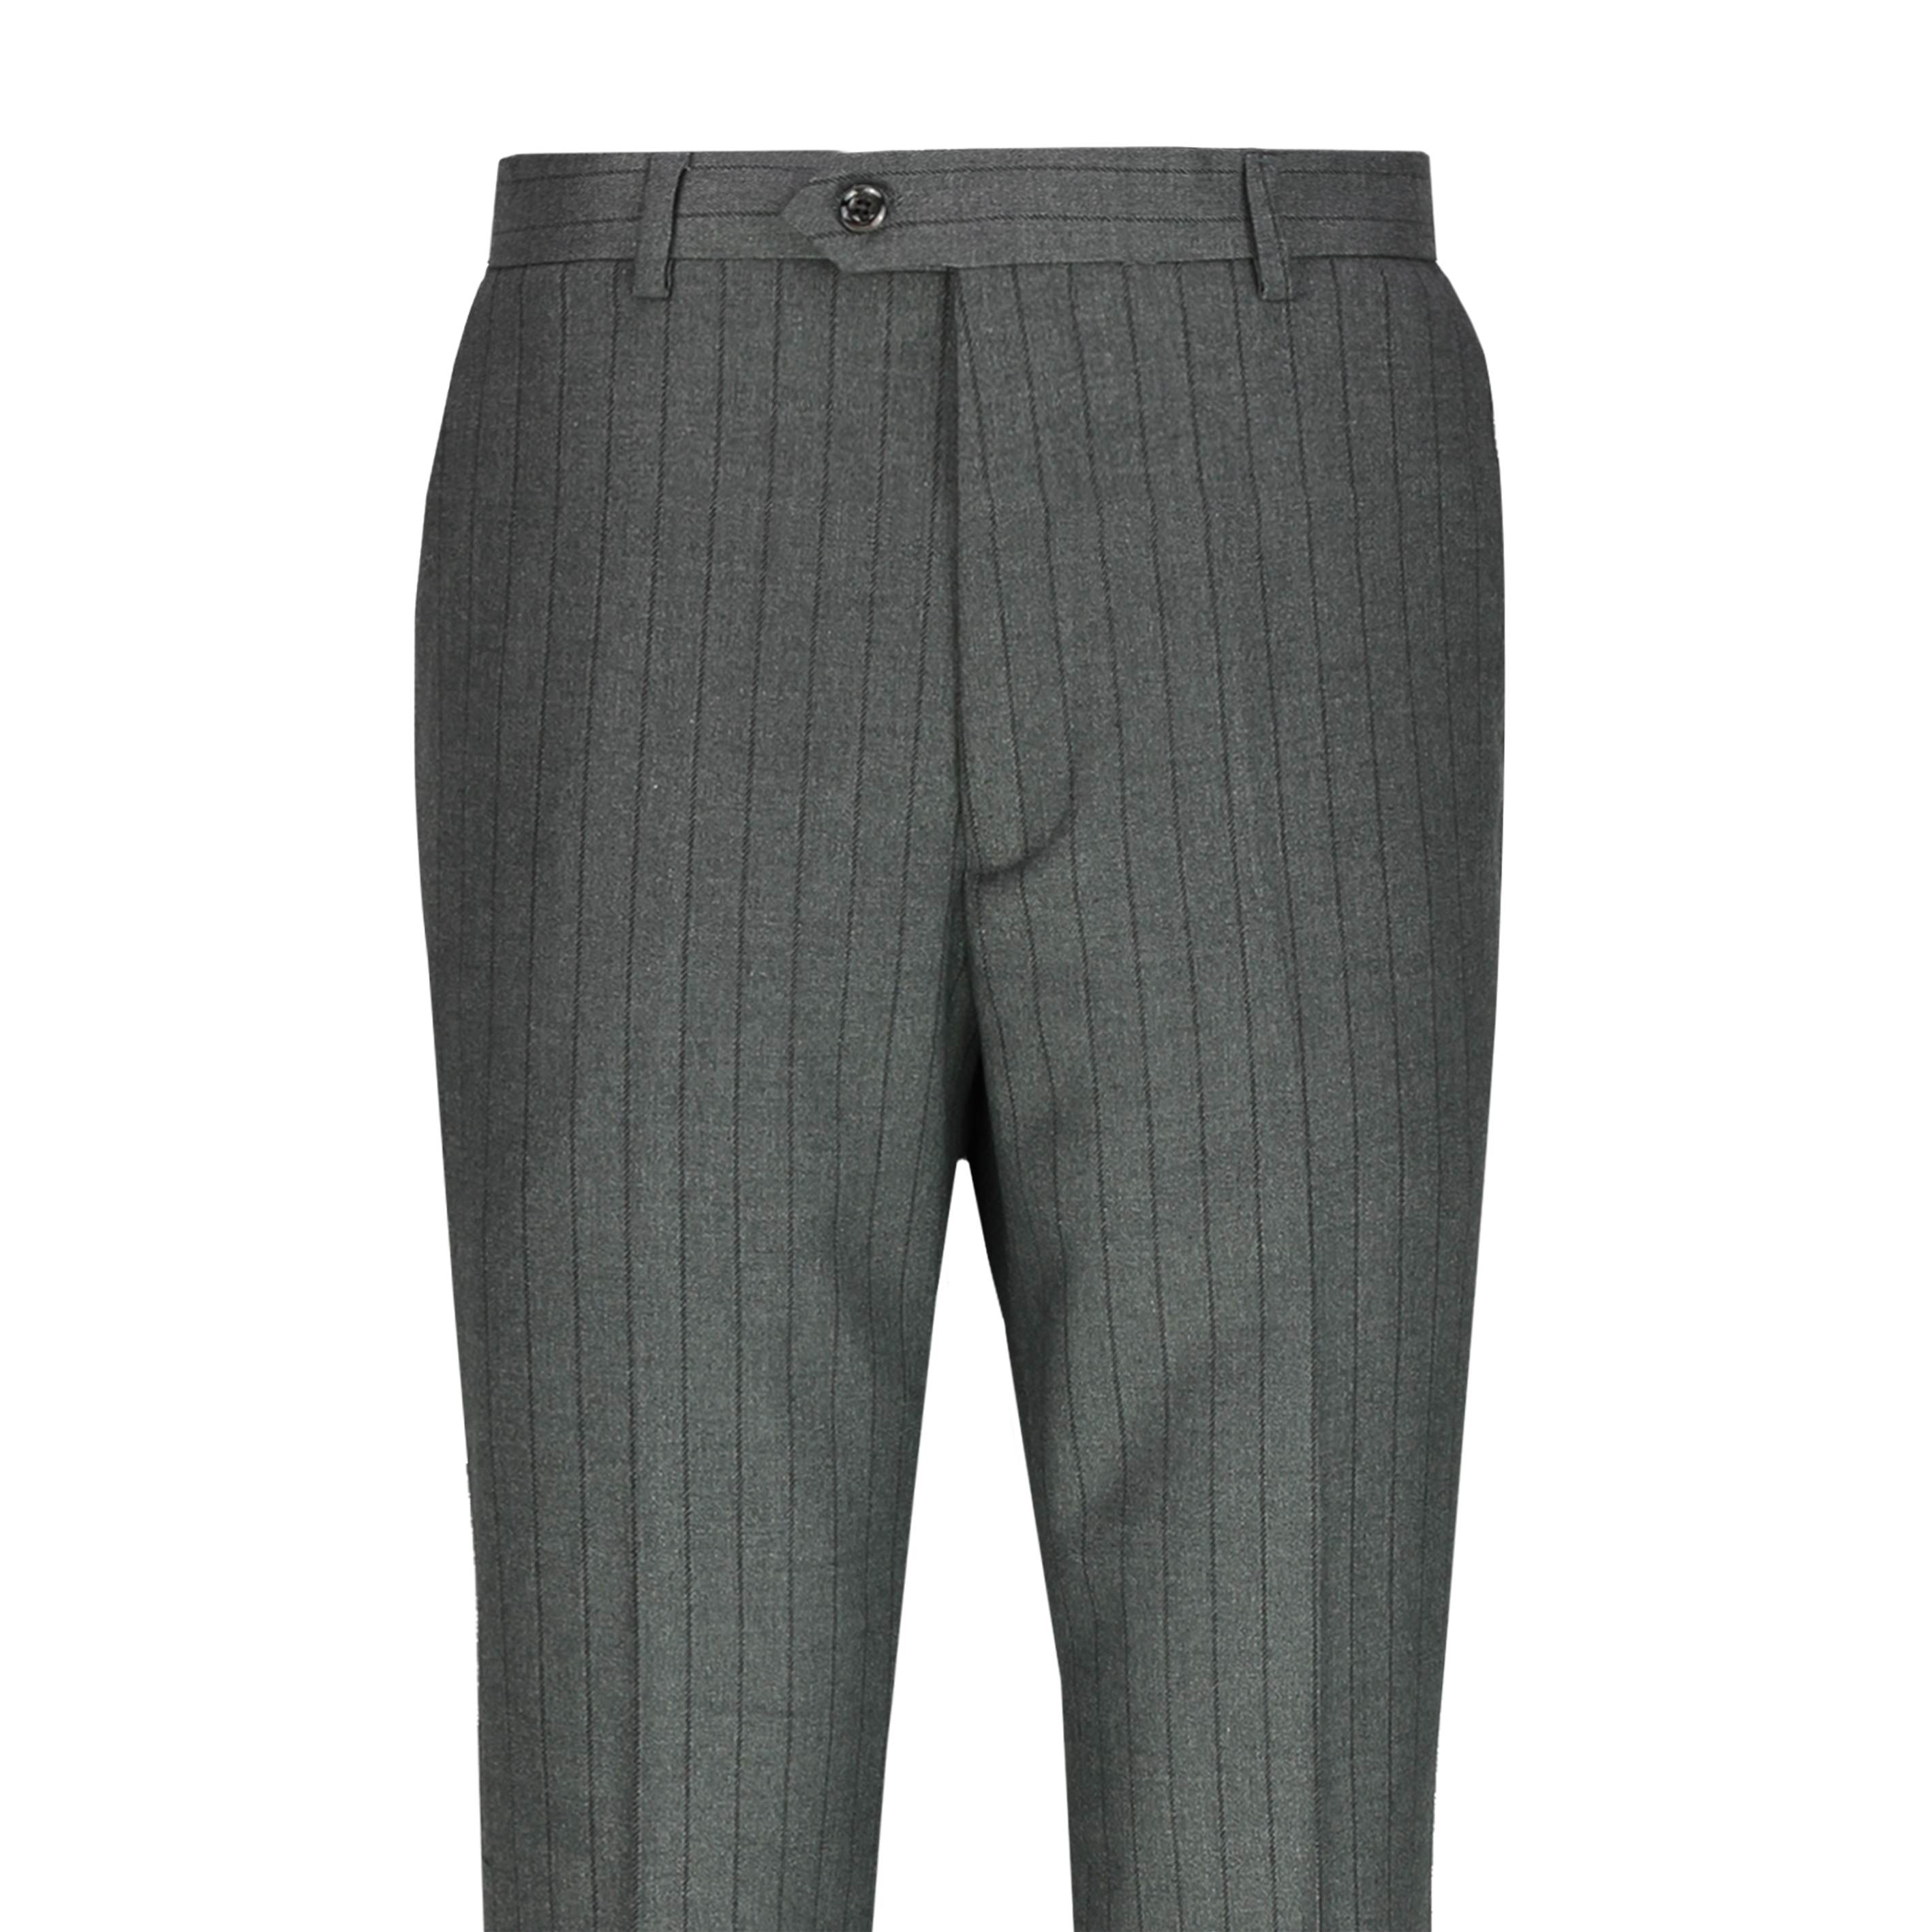 Mens Classic Tweed Pinstripe Trousers Retro Vintage Tailored Fit Suit ...